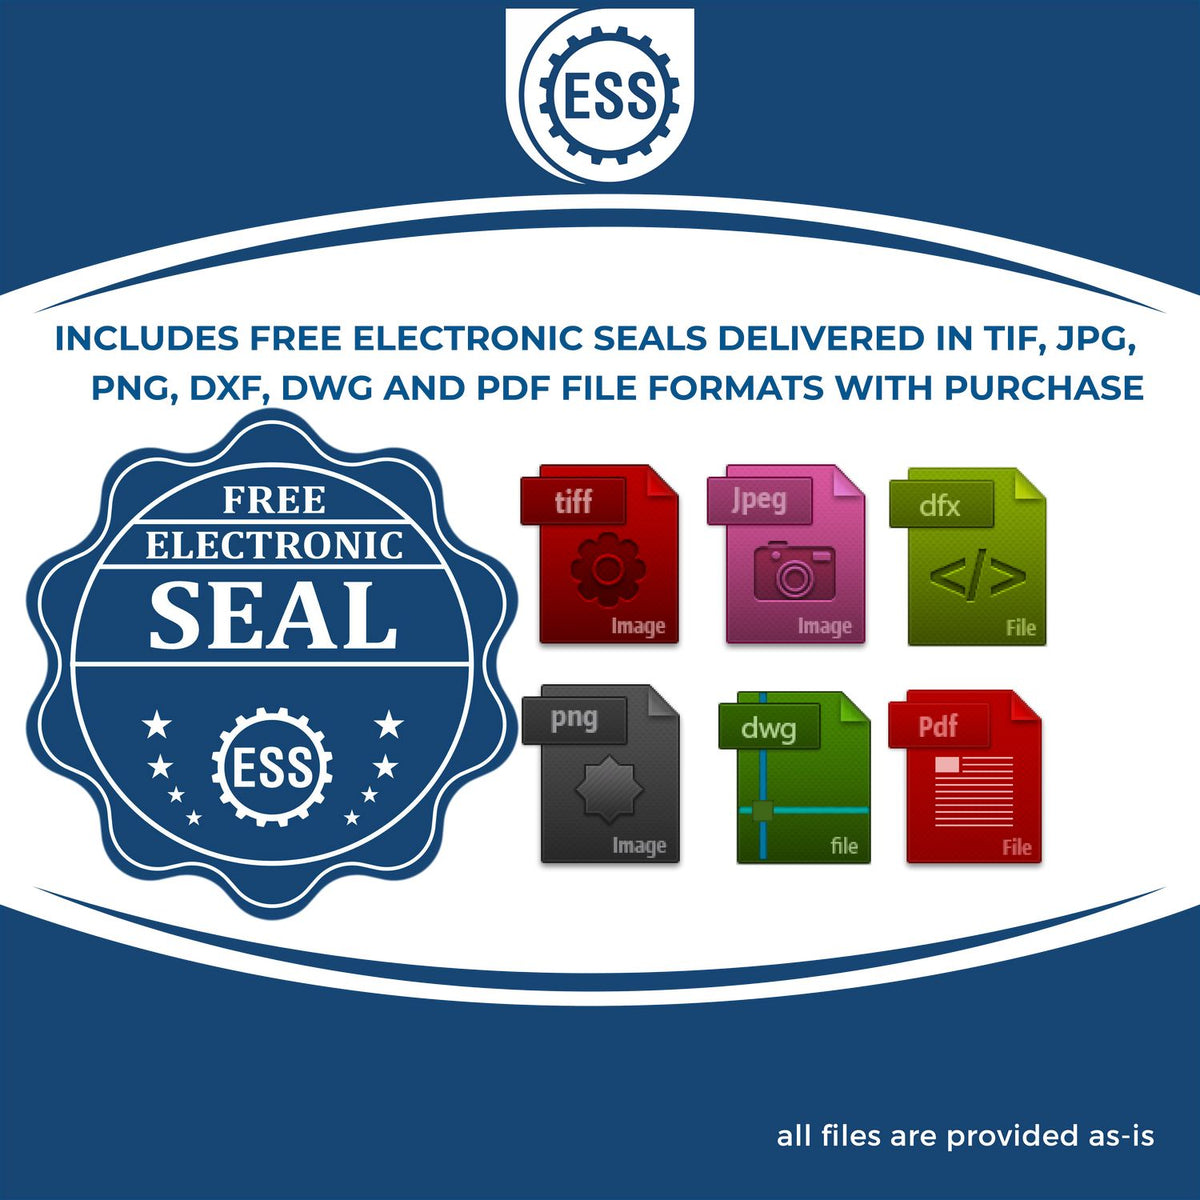 An infographic for the free electronic seal for the Heavy Duty Cast Iron Nebraska Land Surveyor Seal Embosser illustrating the different file type icons such as DXF, DWG, TIF, JPG and PNG.